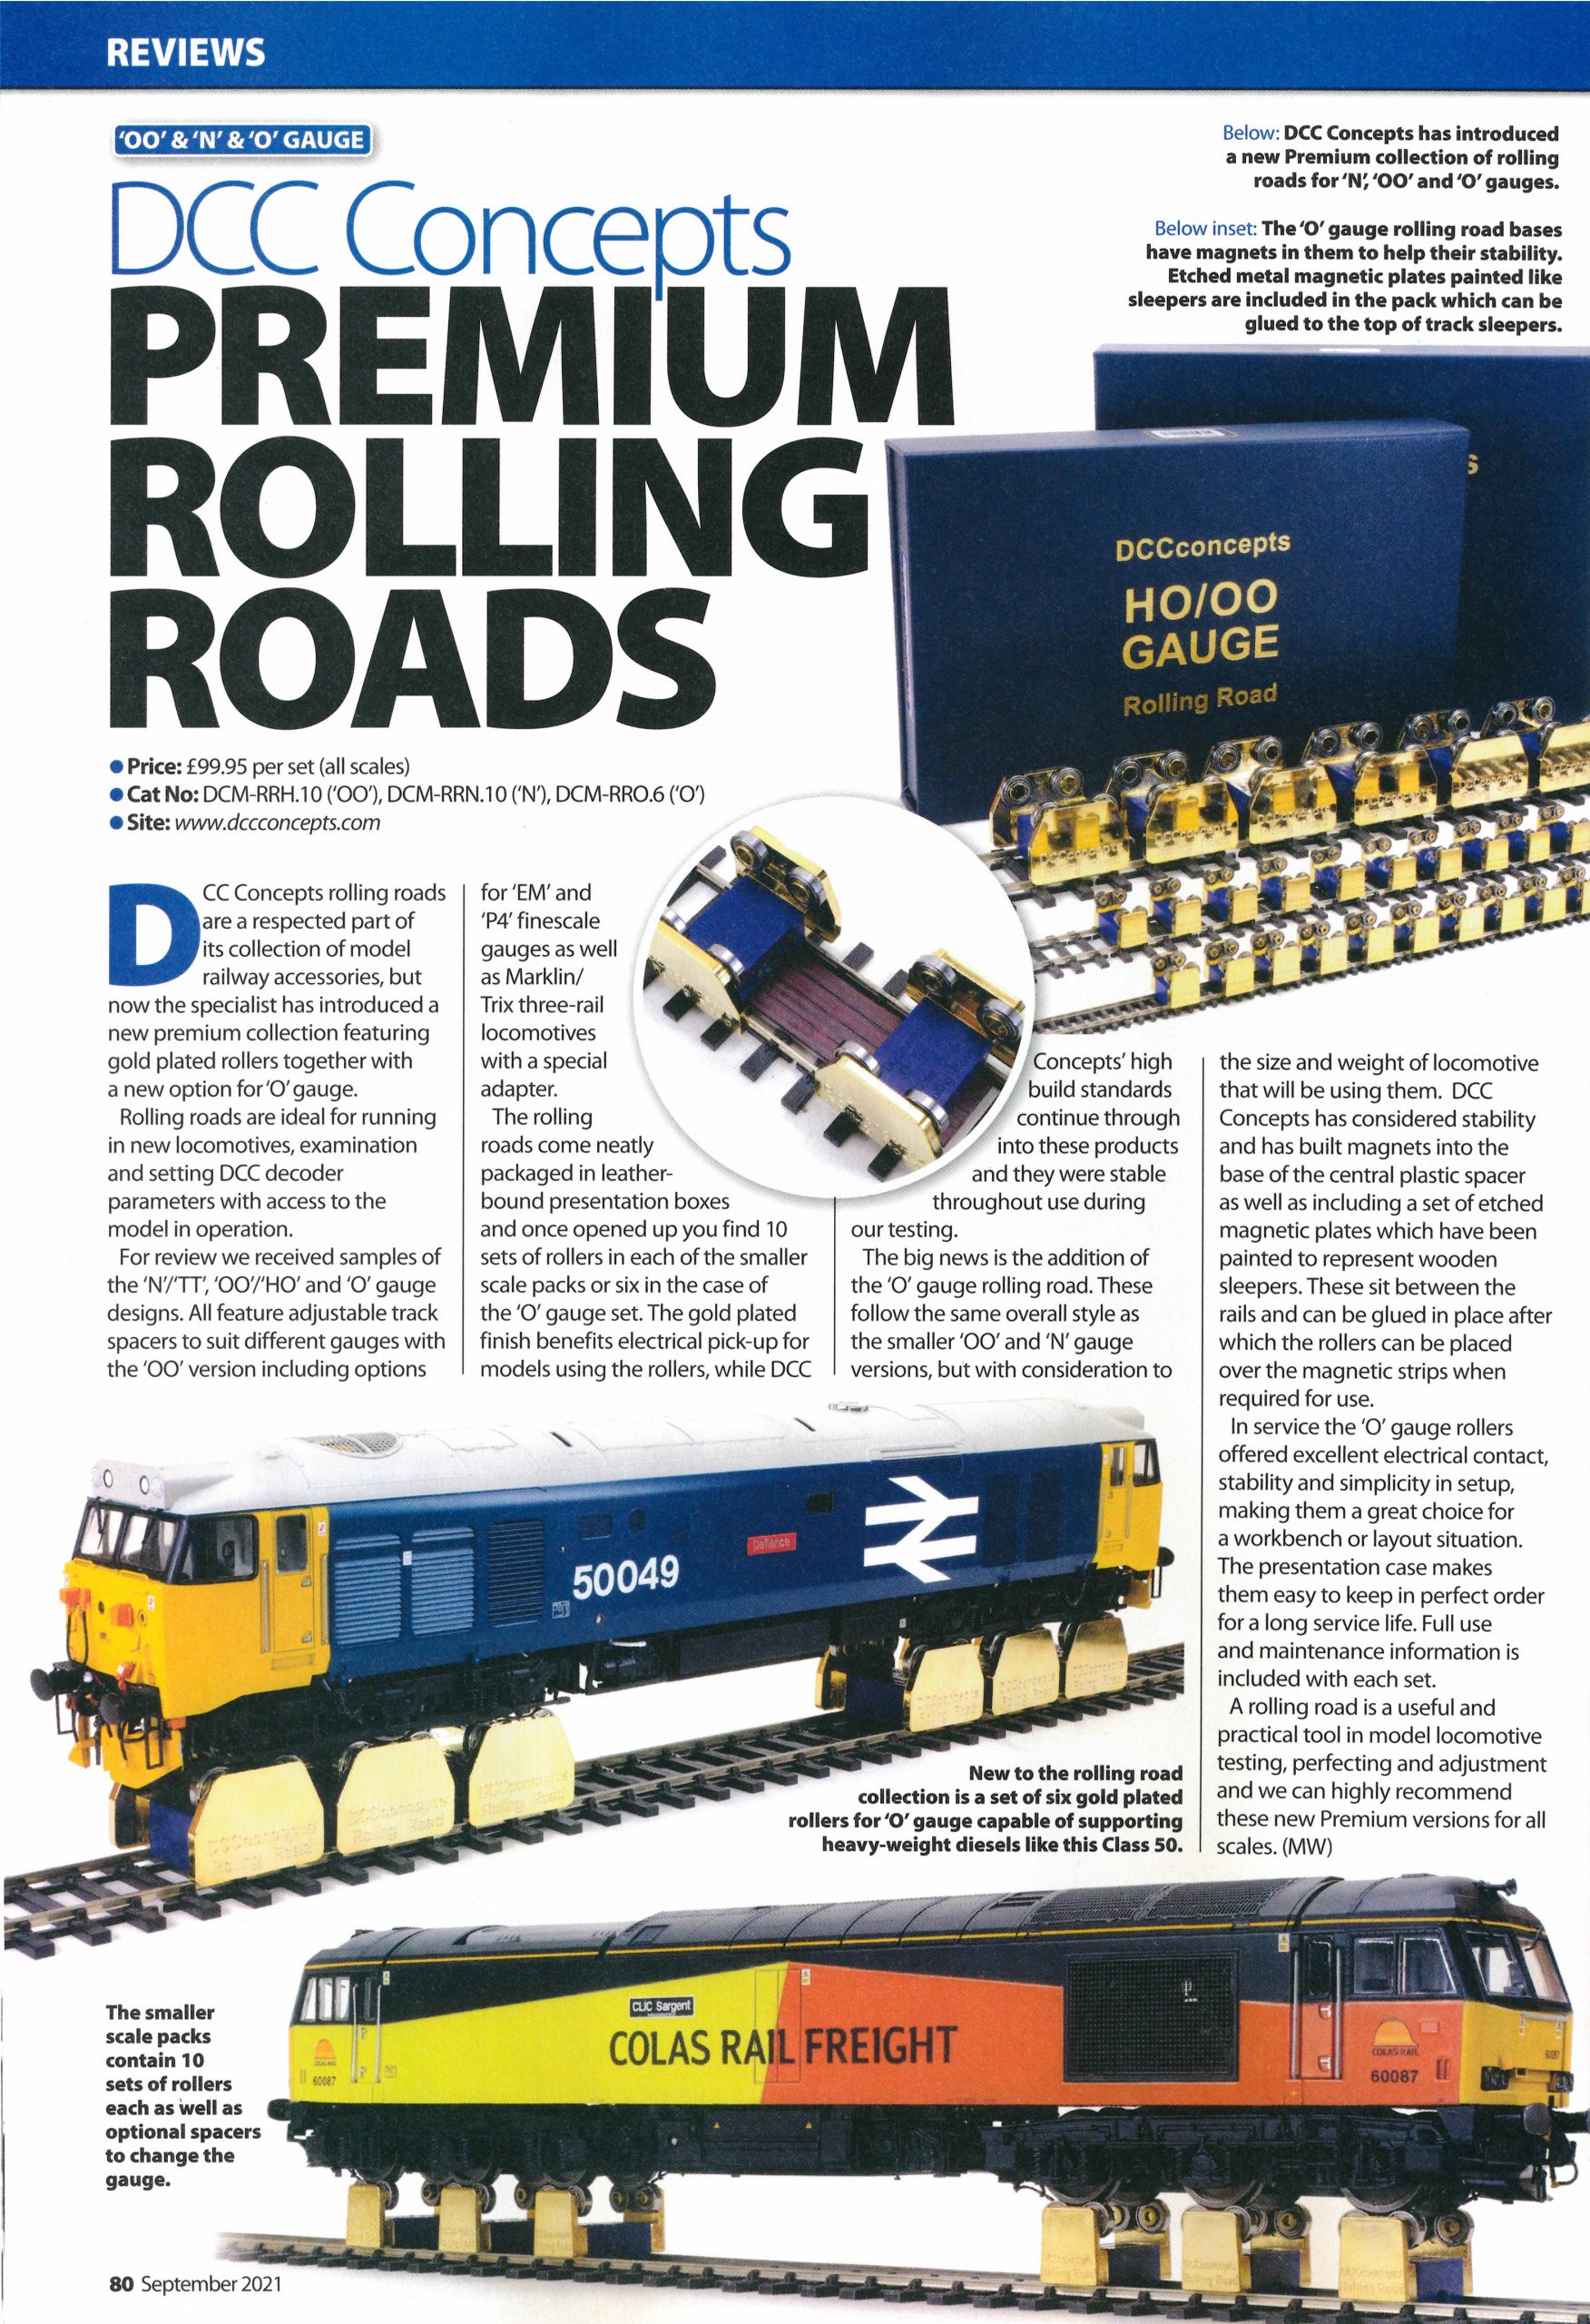 Details about    N SCALE EXTRA SETS OF ROLLERS FOR THE ROLLING ROAD IN THE PICTURES DCC/DC 